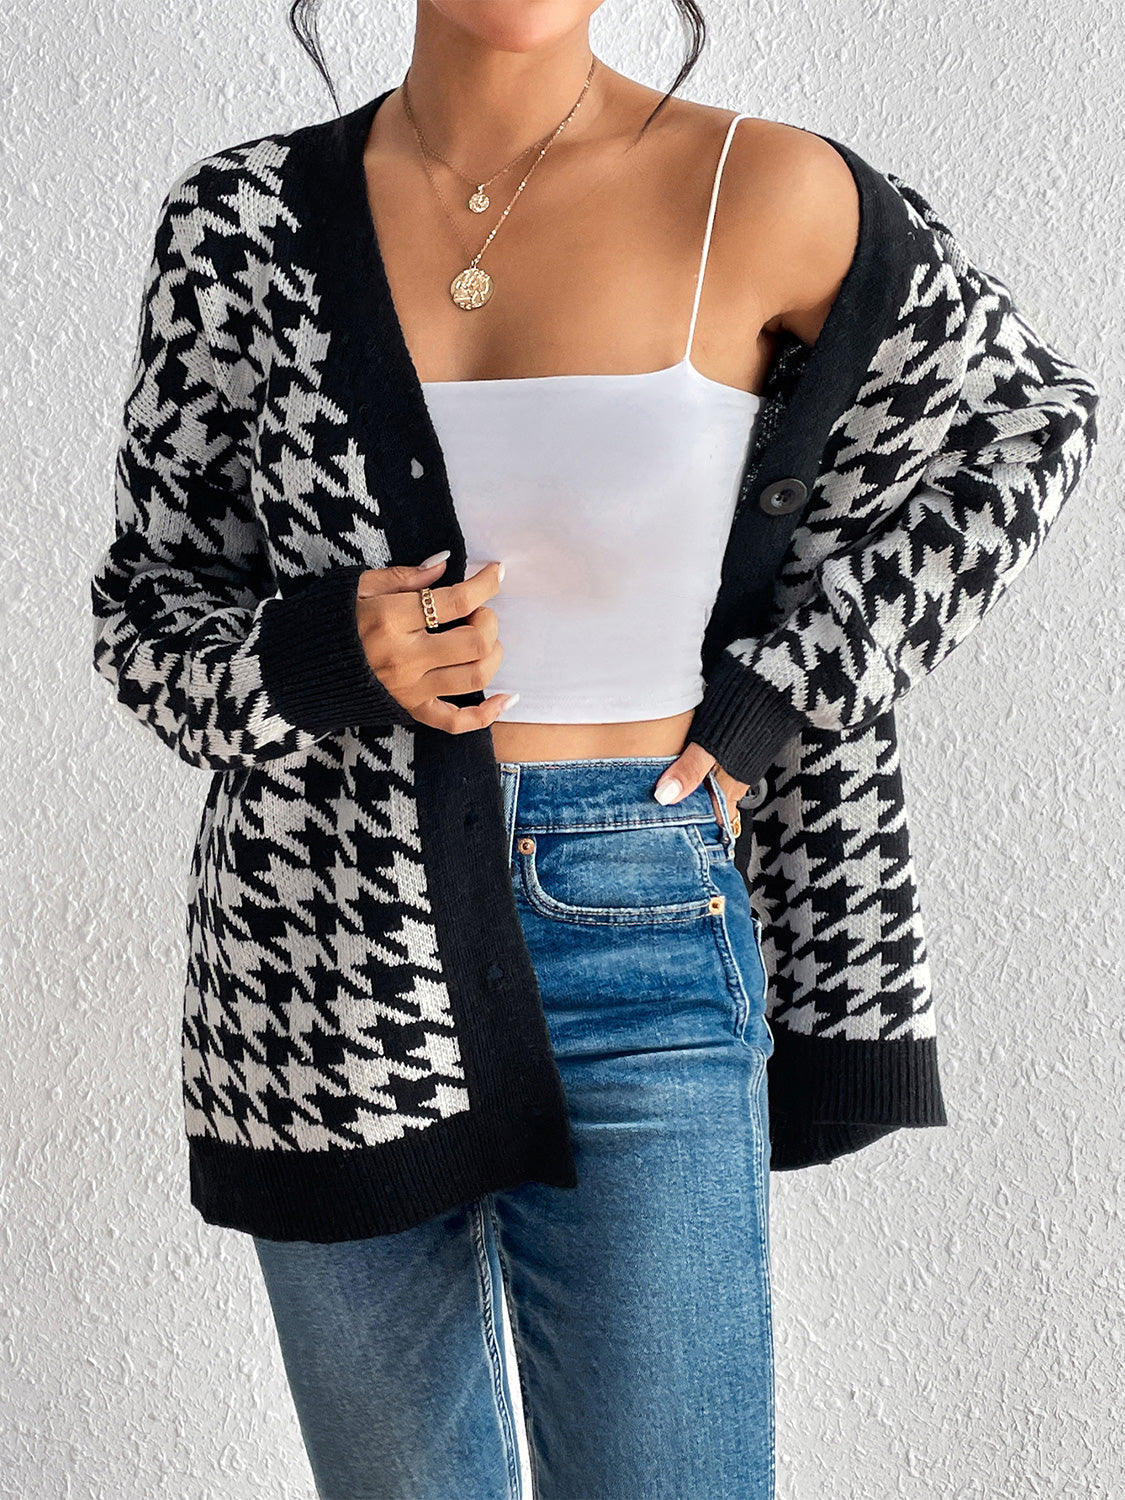 Houndstooth Button Down Cardigan - Women’s Clothing & Accessories - Shirts & Tops - 4 - 2024